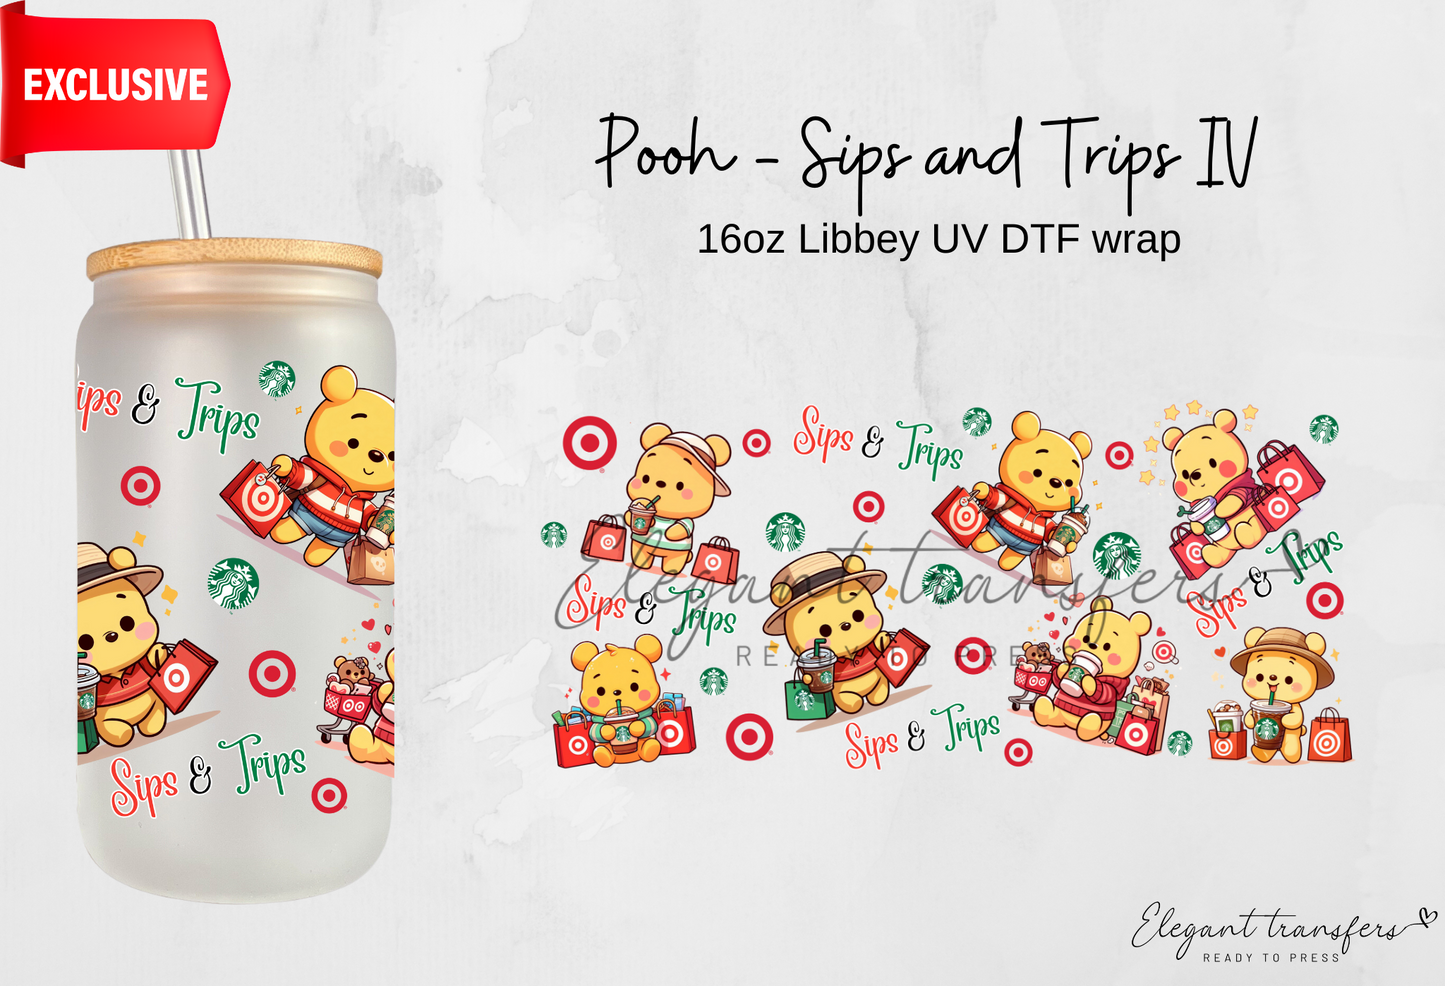 Pooh - Ice Coffee and Shopping IV wrap [Exclusive Uv Dtf - 16oz Libbey Glass Can] | Ready to Apply | Physical Product